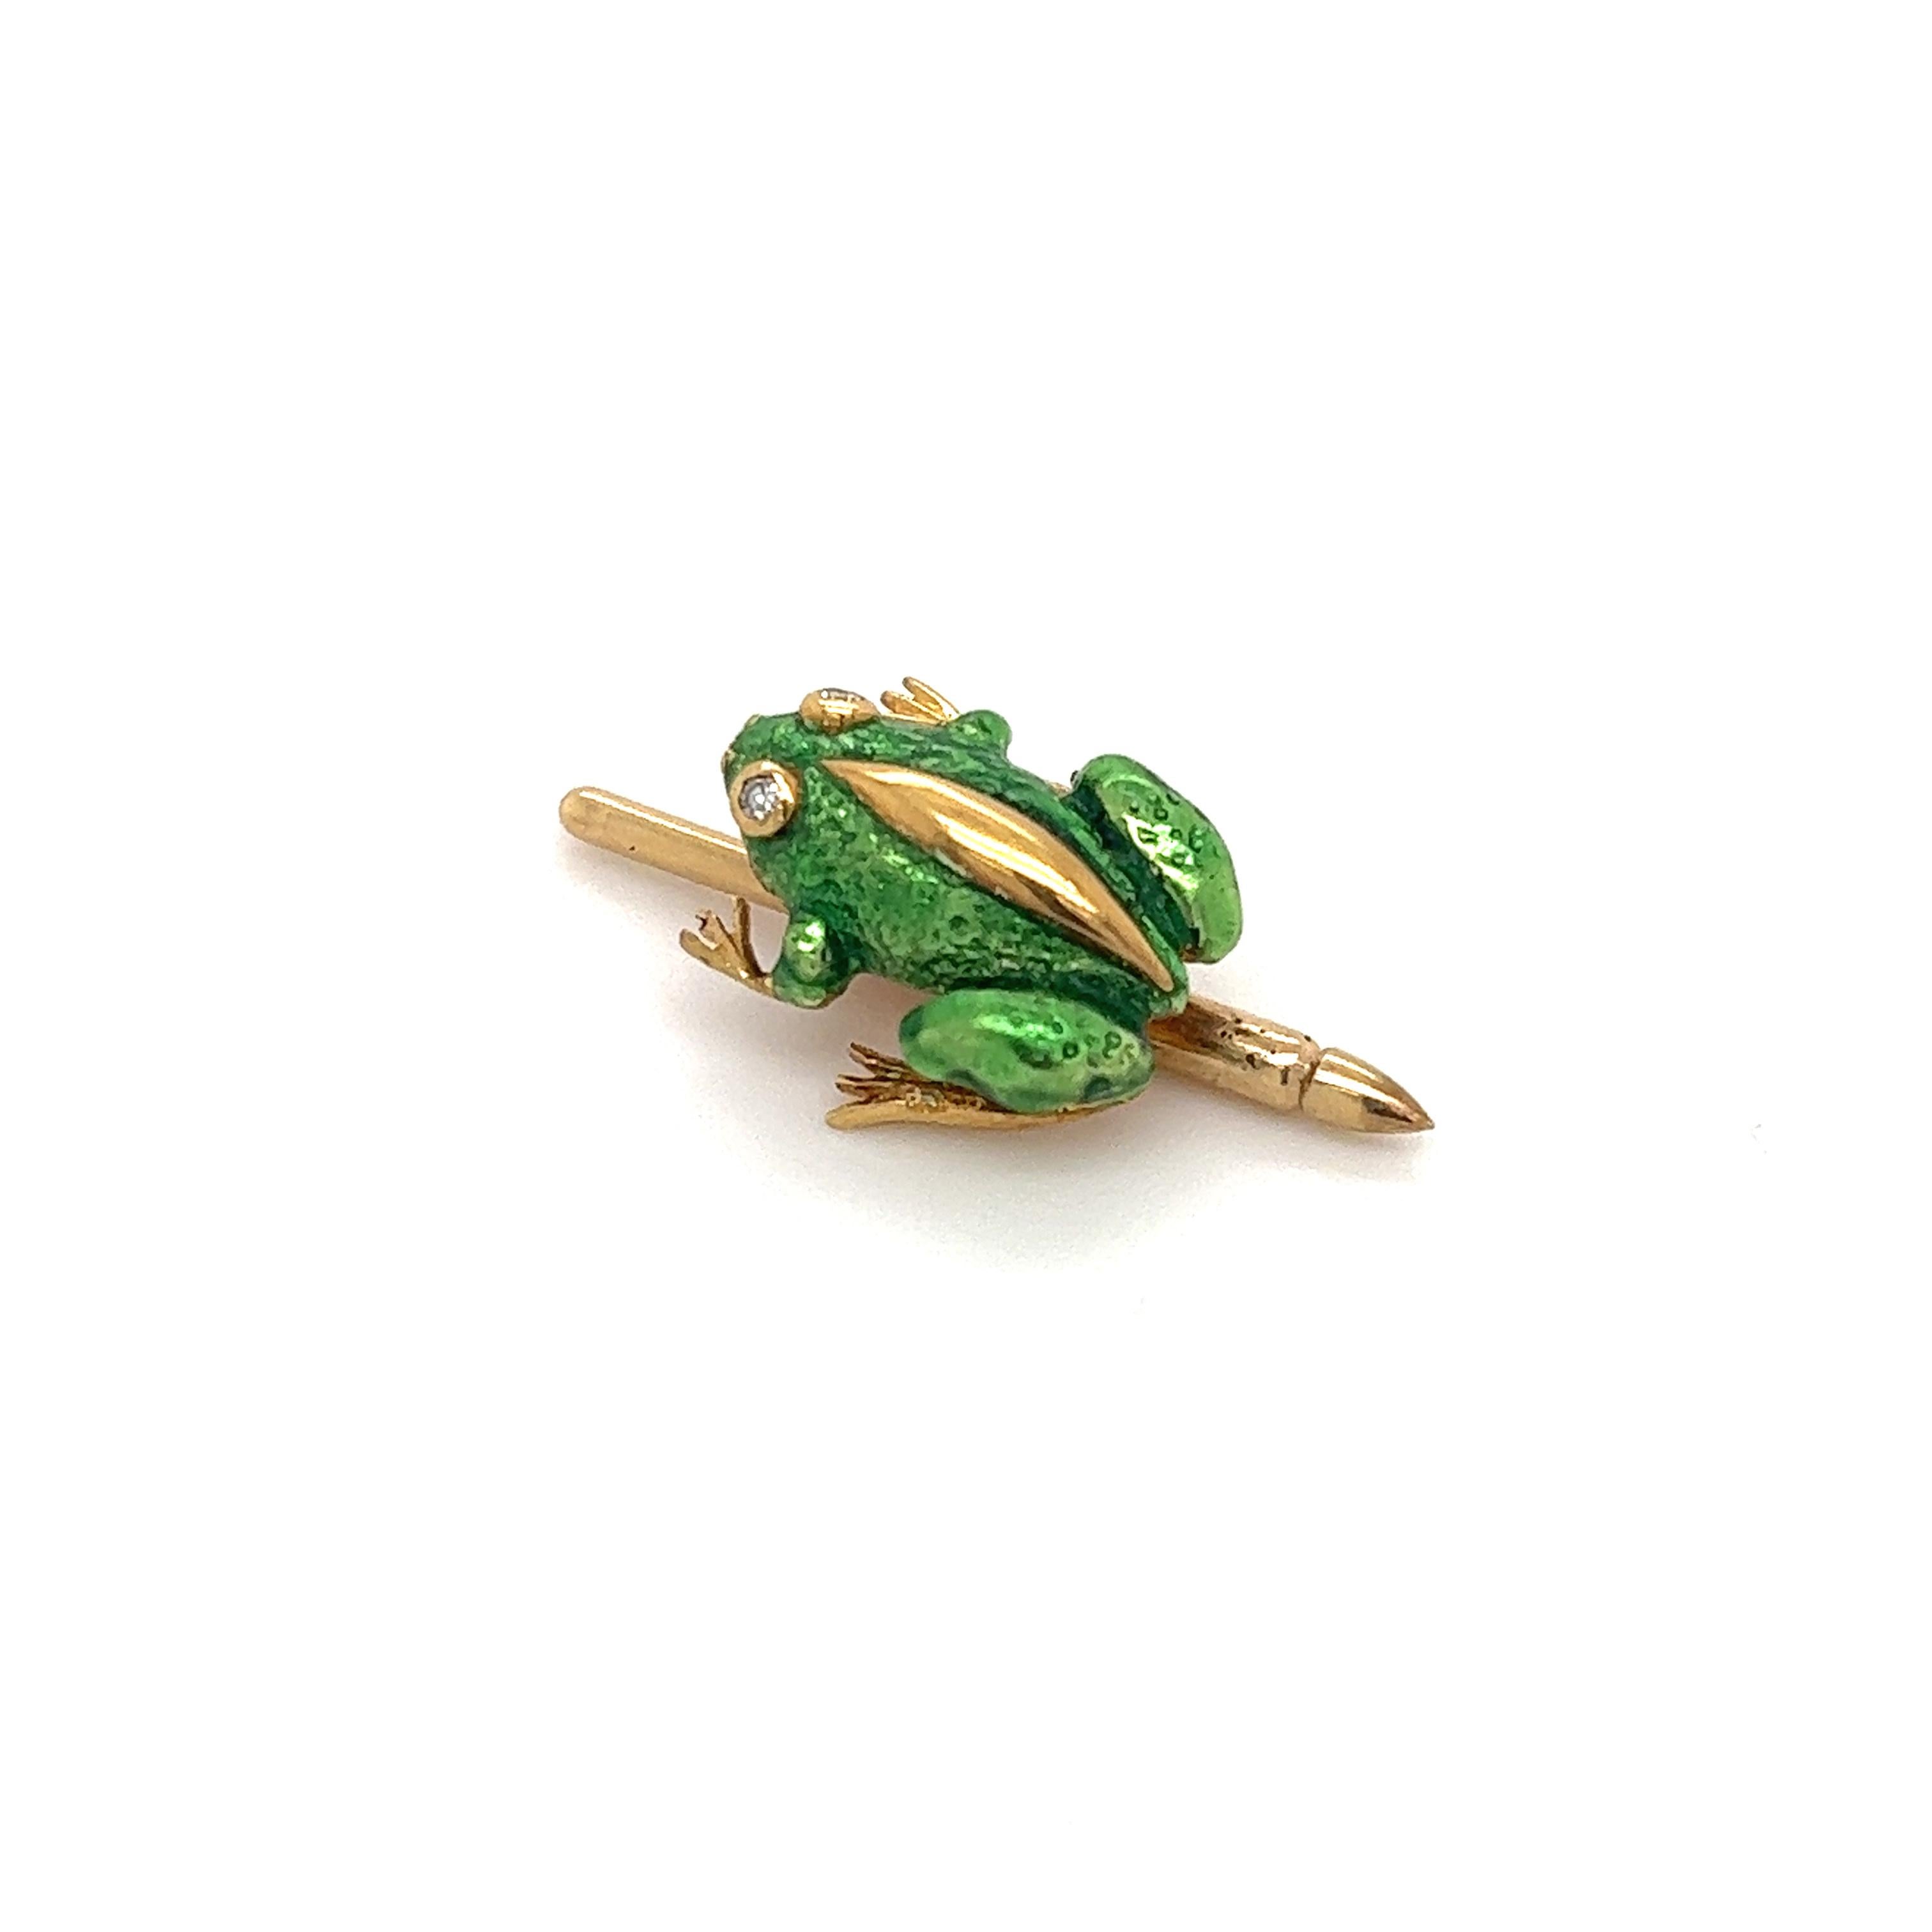 Stand out with this unique item, sure to grab attention whenever worn. The single button stud is crafted in 14k yellow gold. The button stud is in the form of a frog with vibrant green colored enamel. The frog is set with single cut diamonds in the